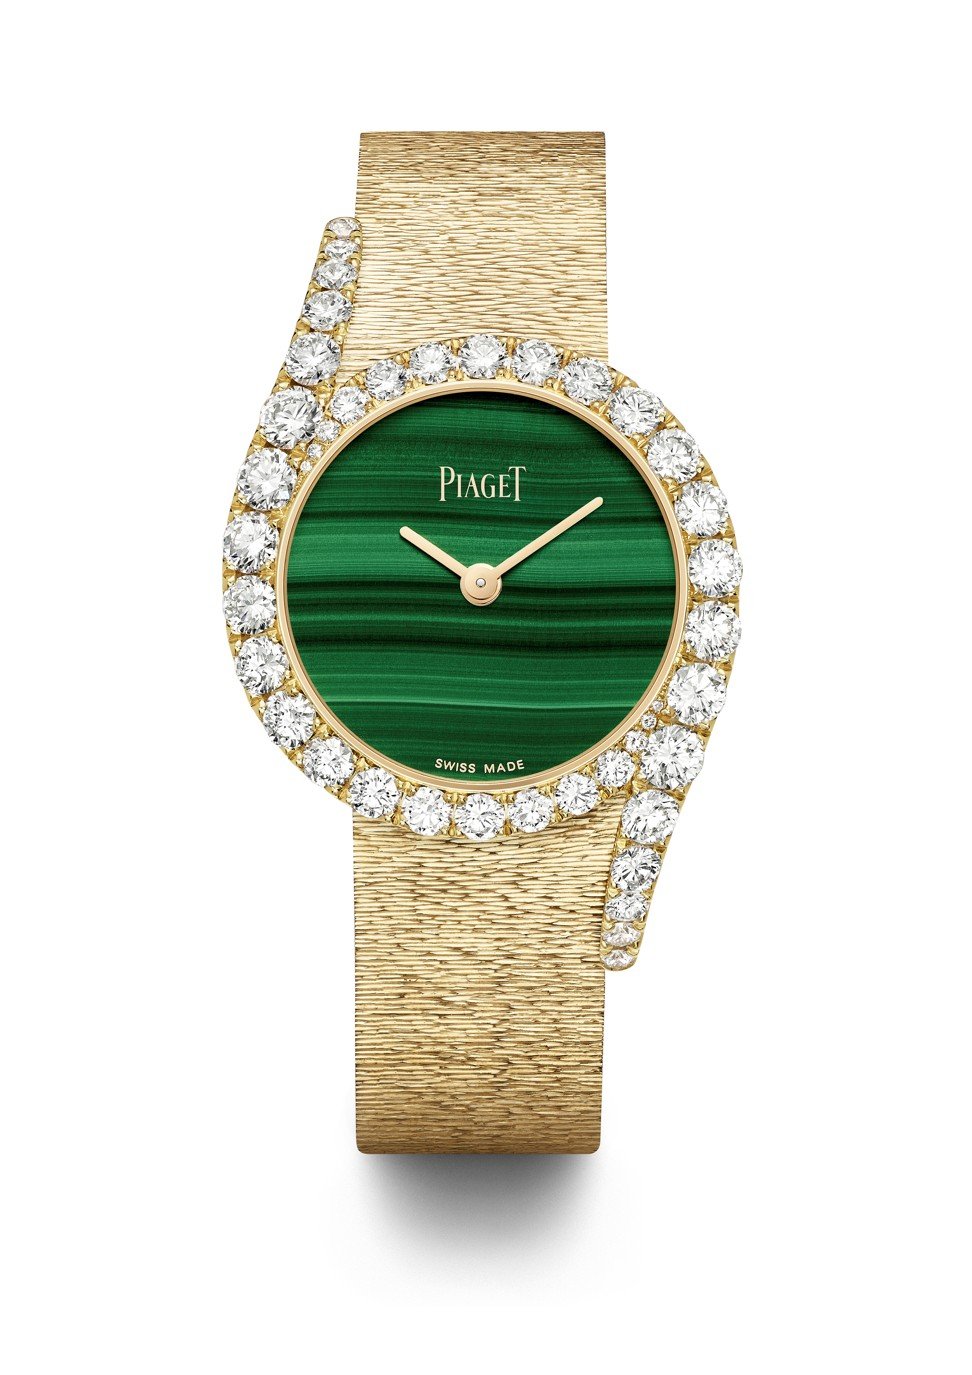 Piaget’s Limelight Gala with malachite dial and diamonds around the bezel